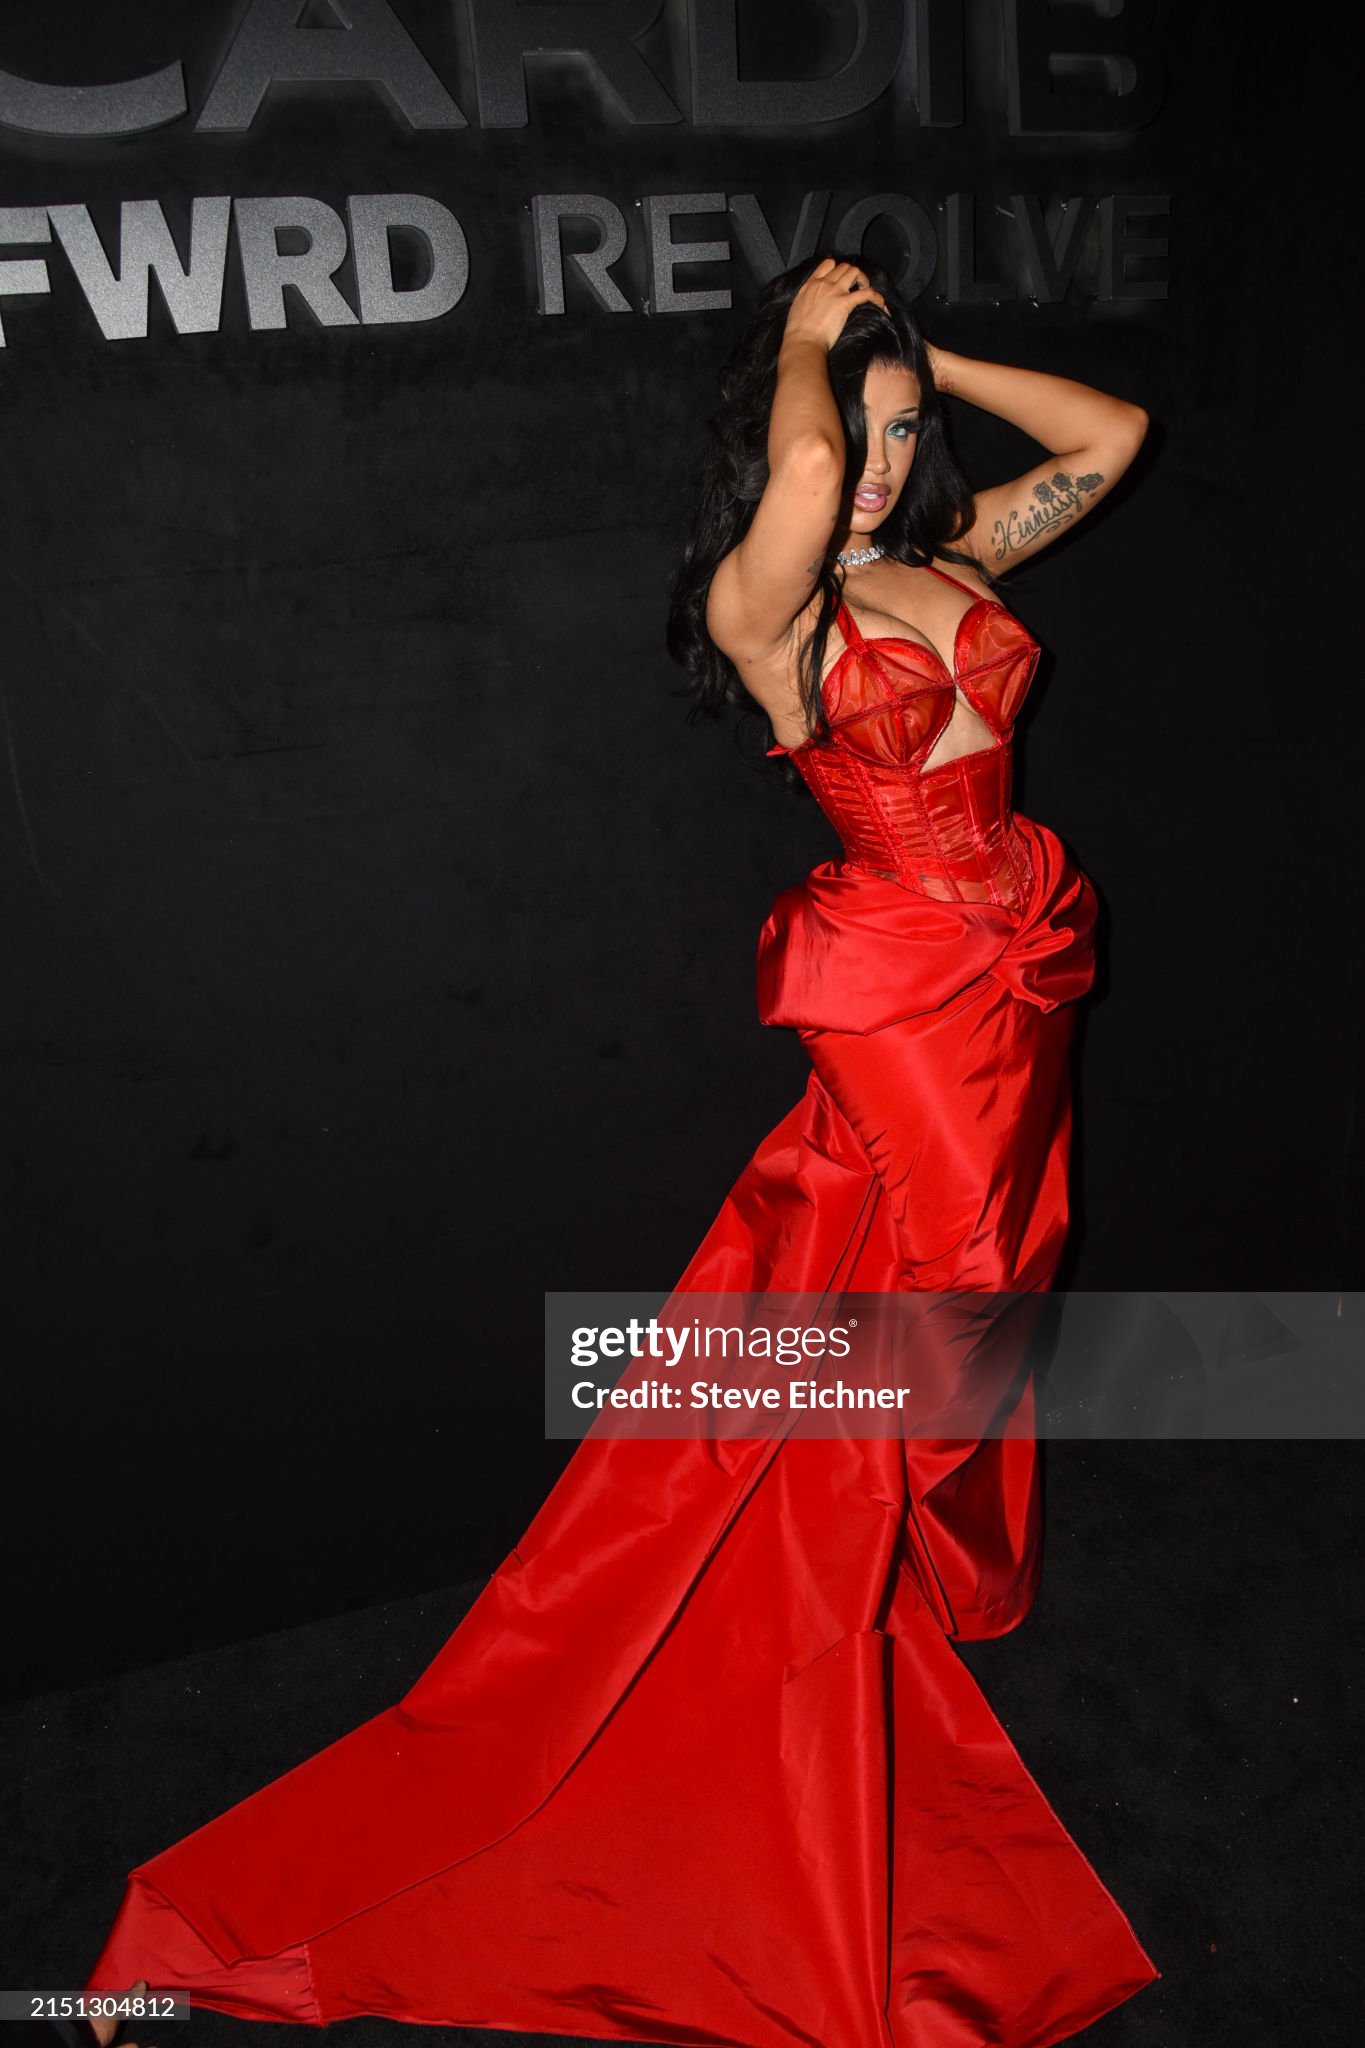 gettyimages-2151304812-2048x2048.jpg